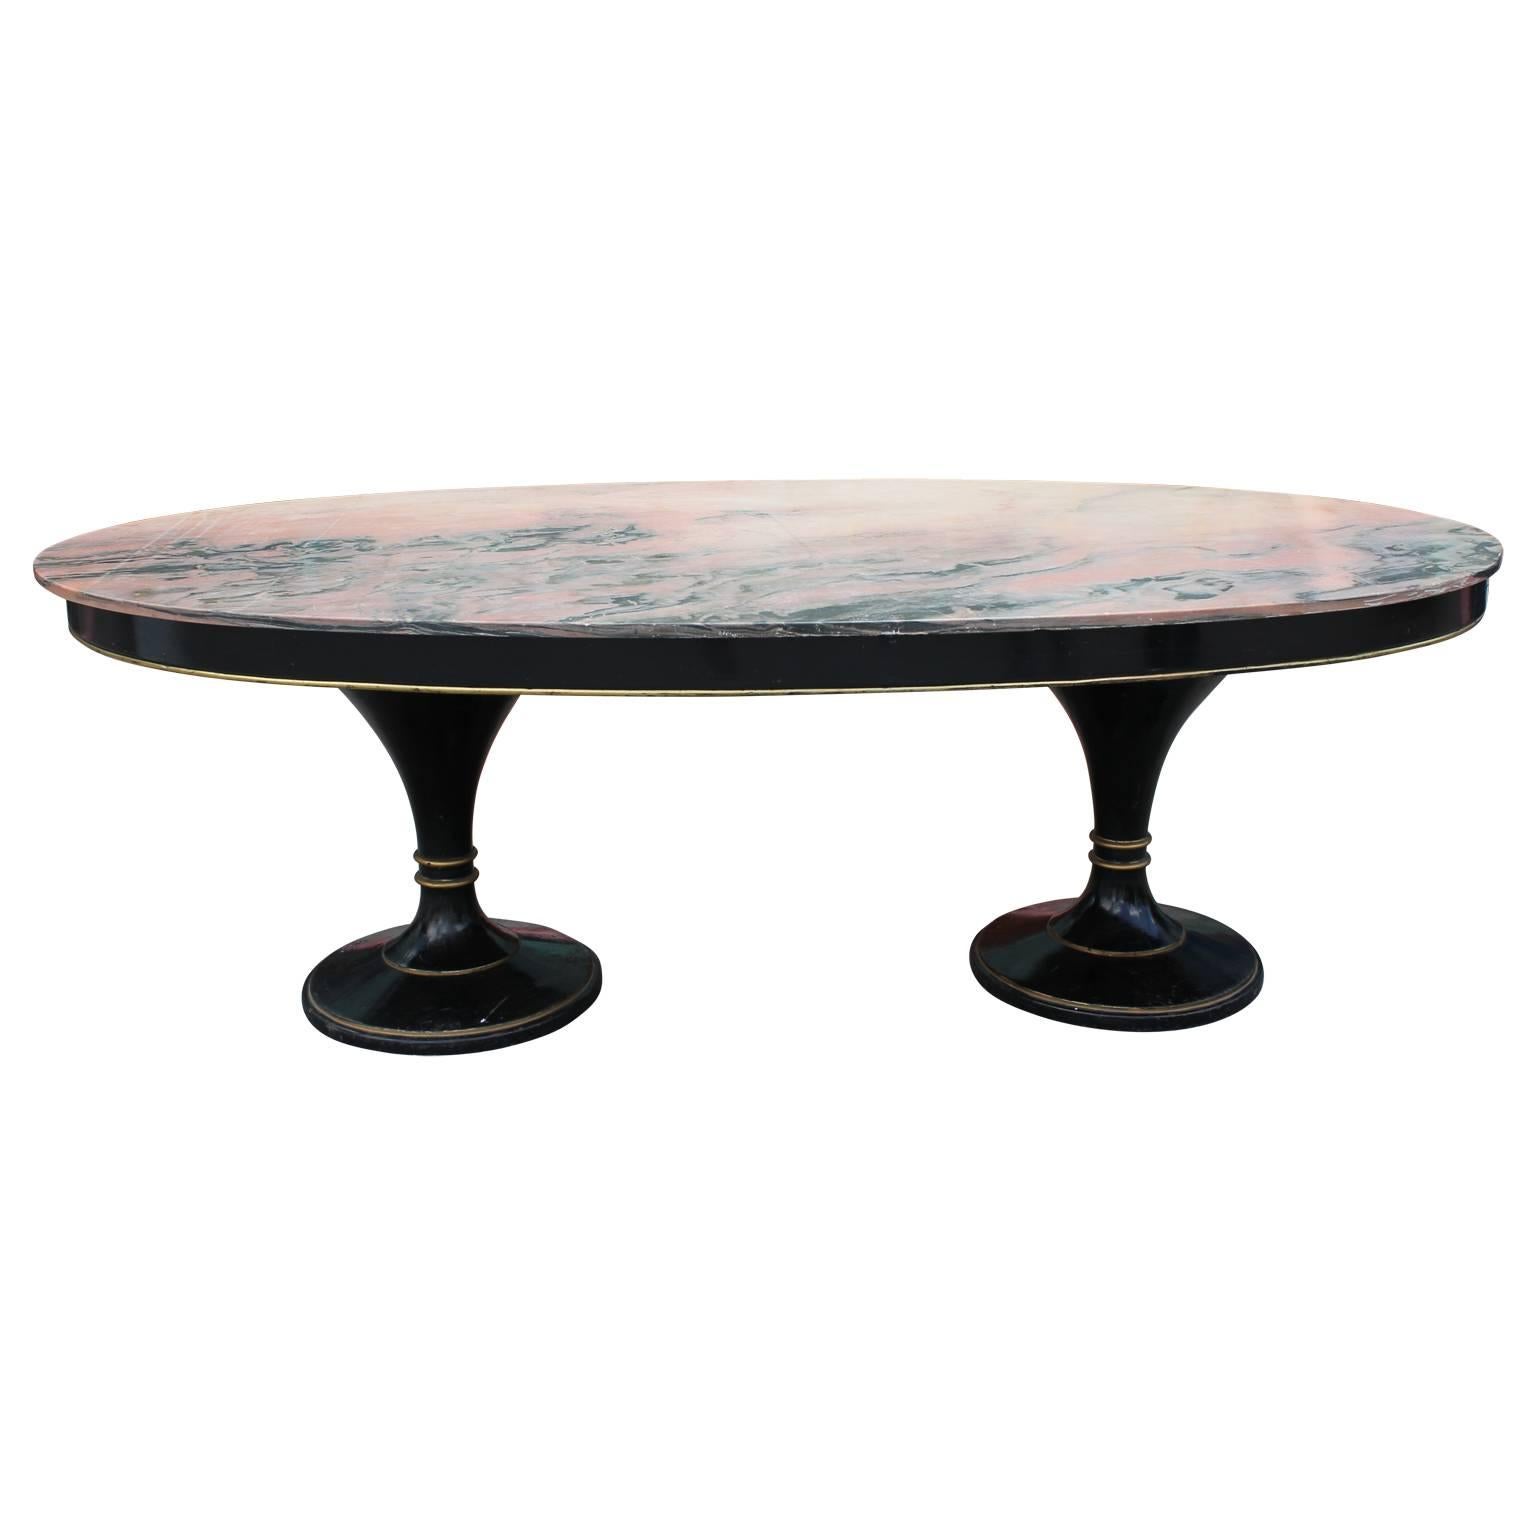 Oval top dining table with pink marble attributed to Maison Jansen, made in Argentina.